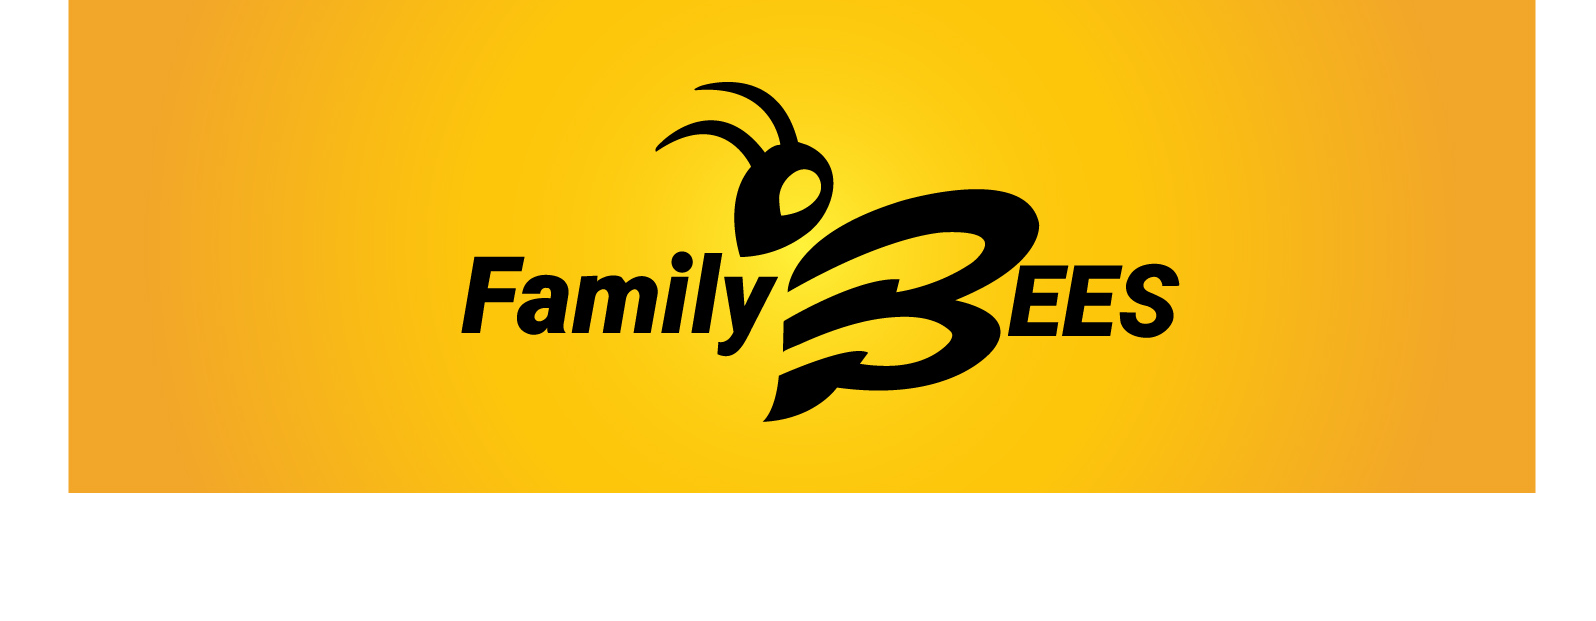 Family Bees